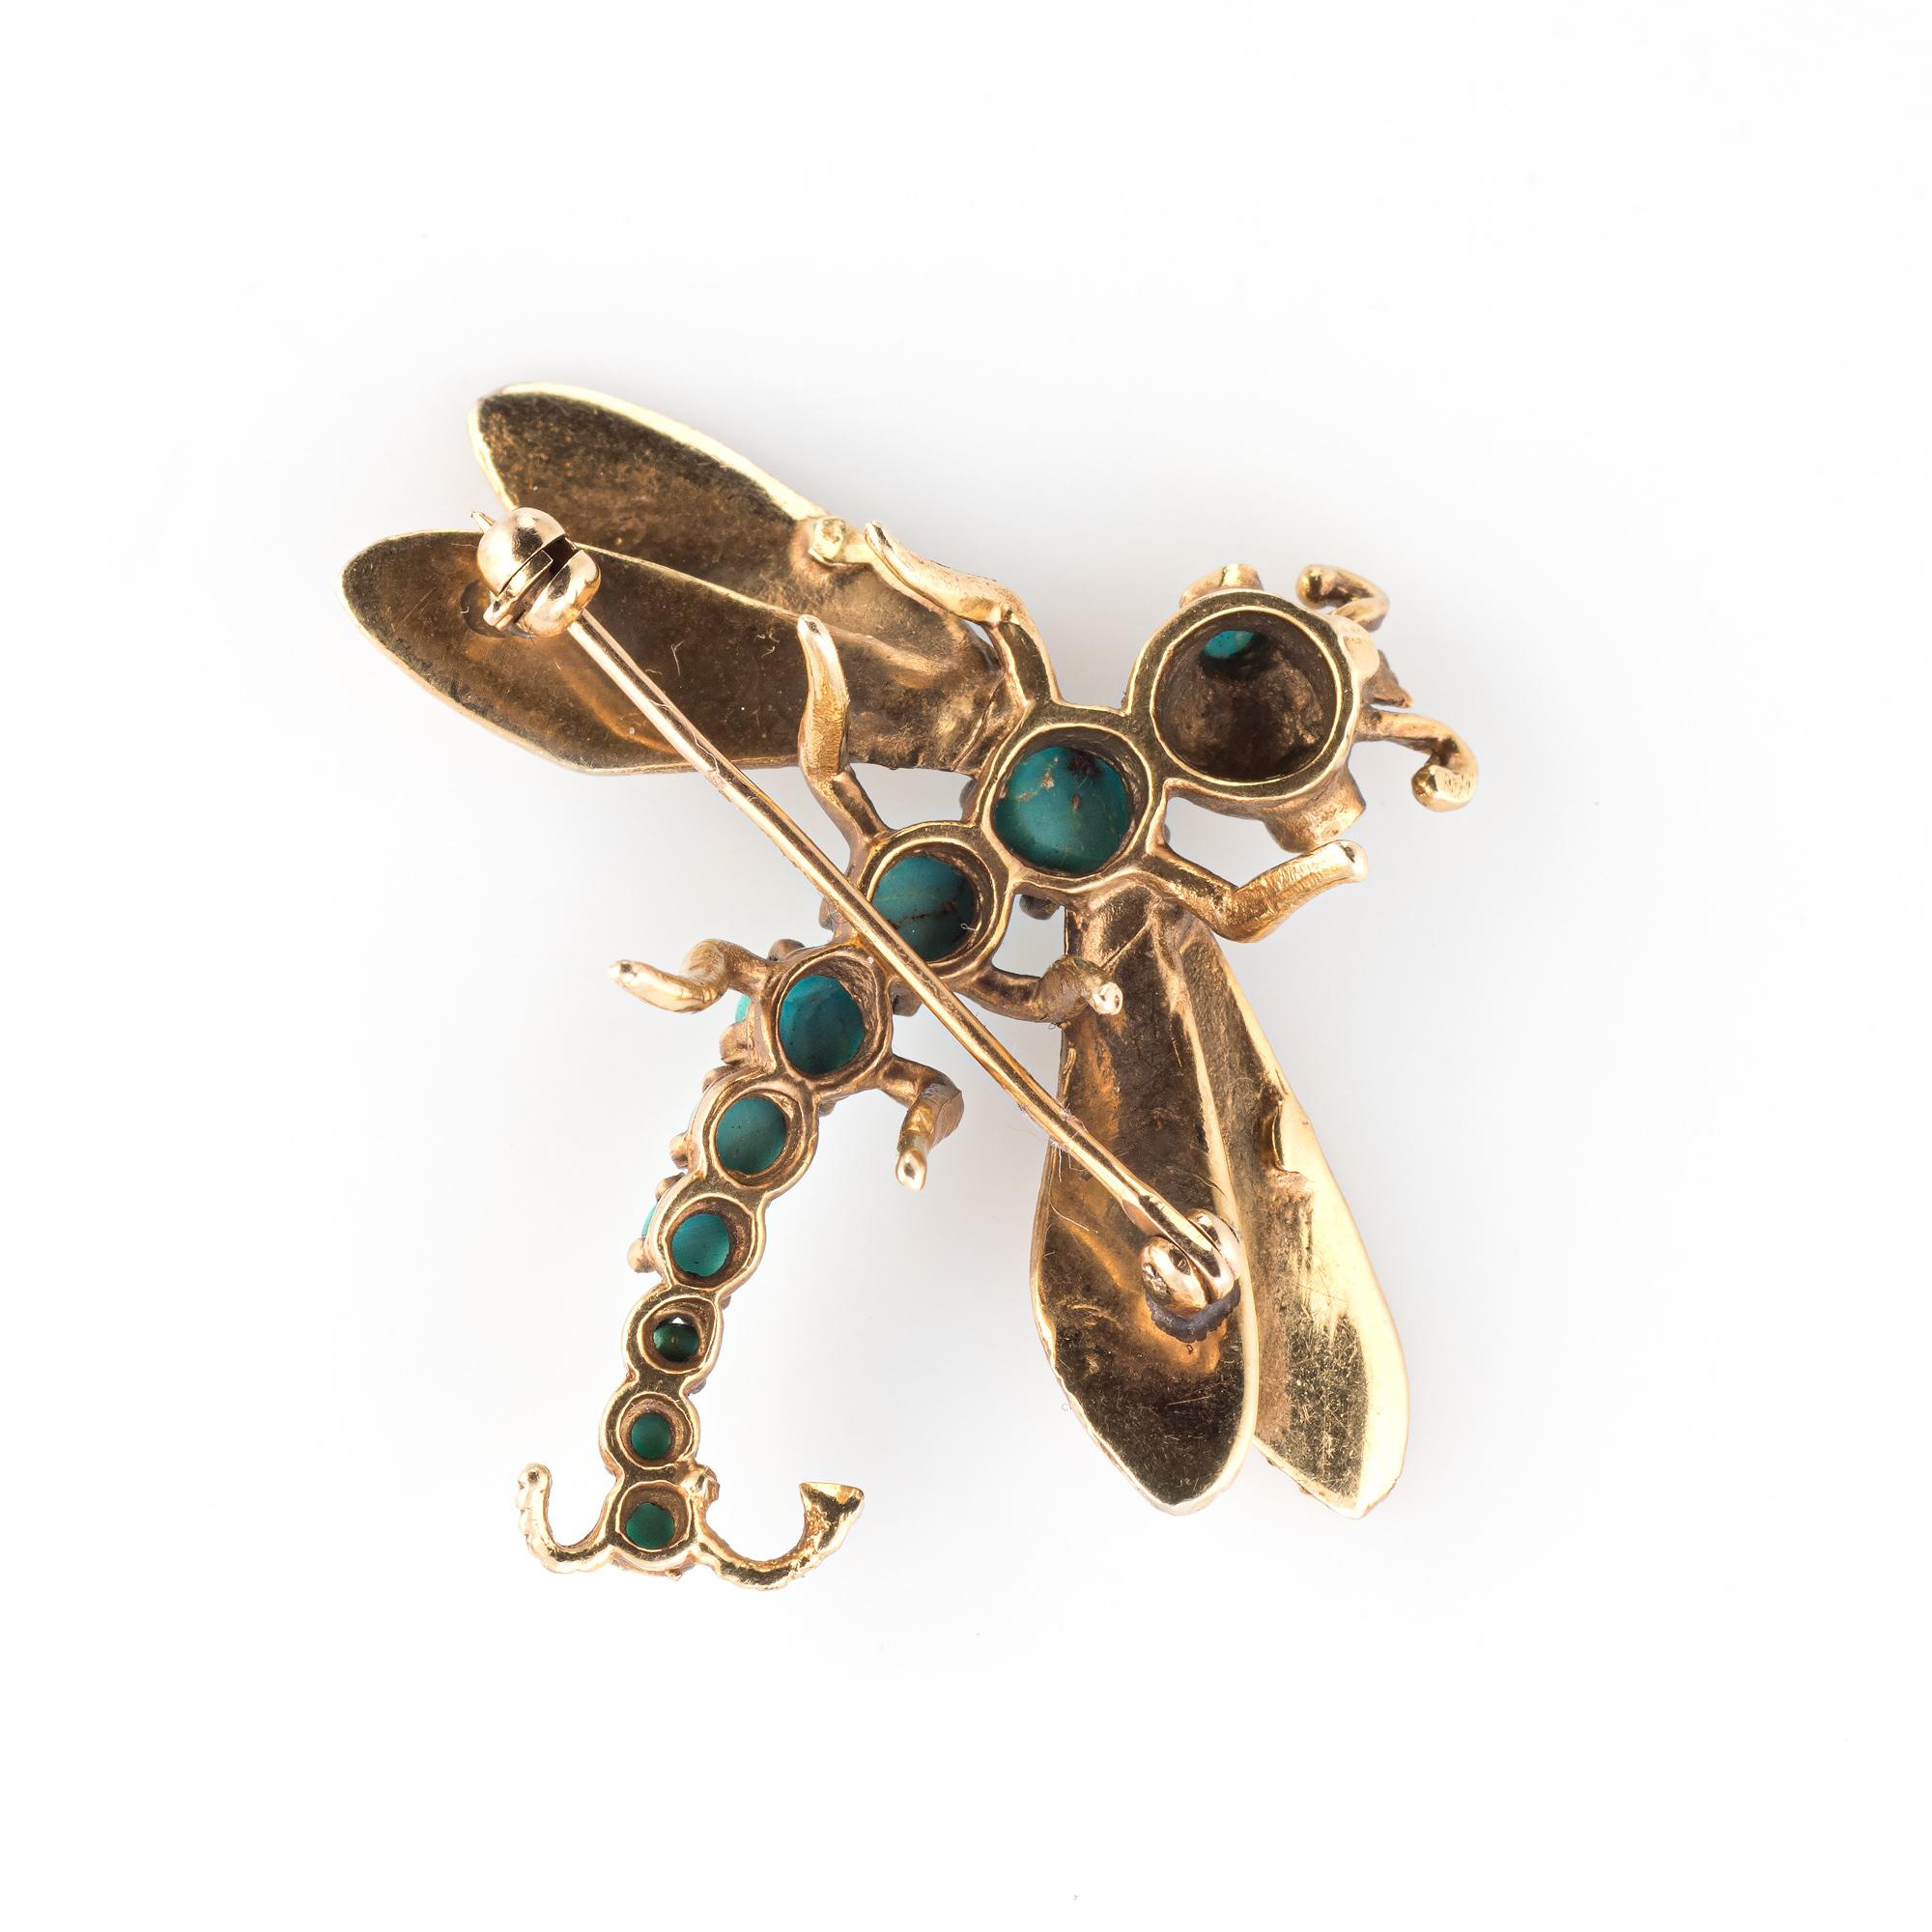 Finely detailed turquoise dragonfly brooch crafted in 14 karat yellow gold (circa 1960s).  

Egg shell blue Turquoise graduates in size from 2mm to 5mm.     

The dragonfly symbolizes change, transformation and adaptability. The dragonfly is great